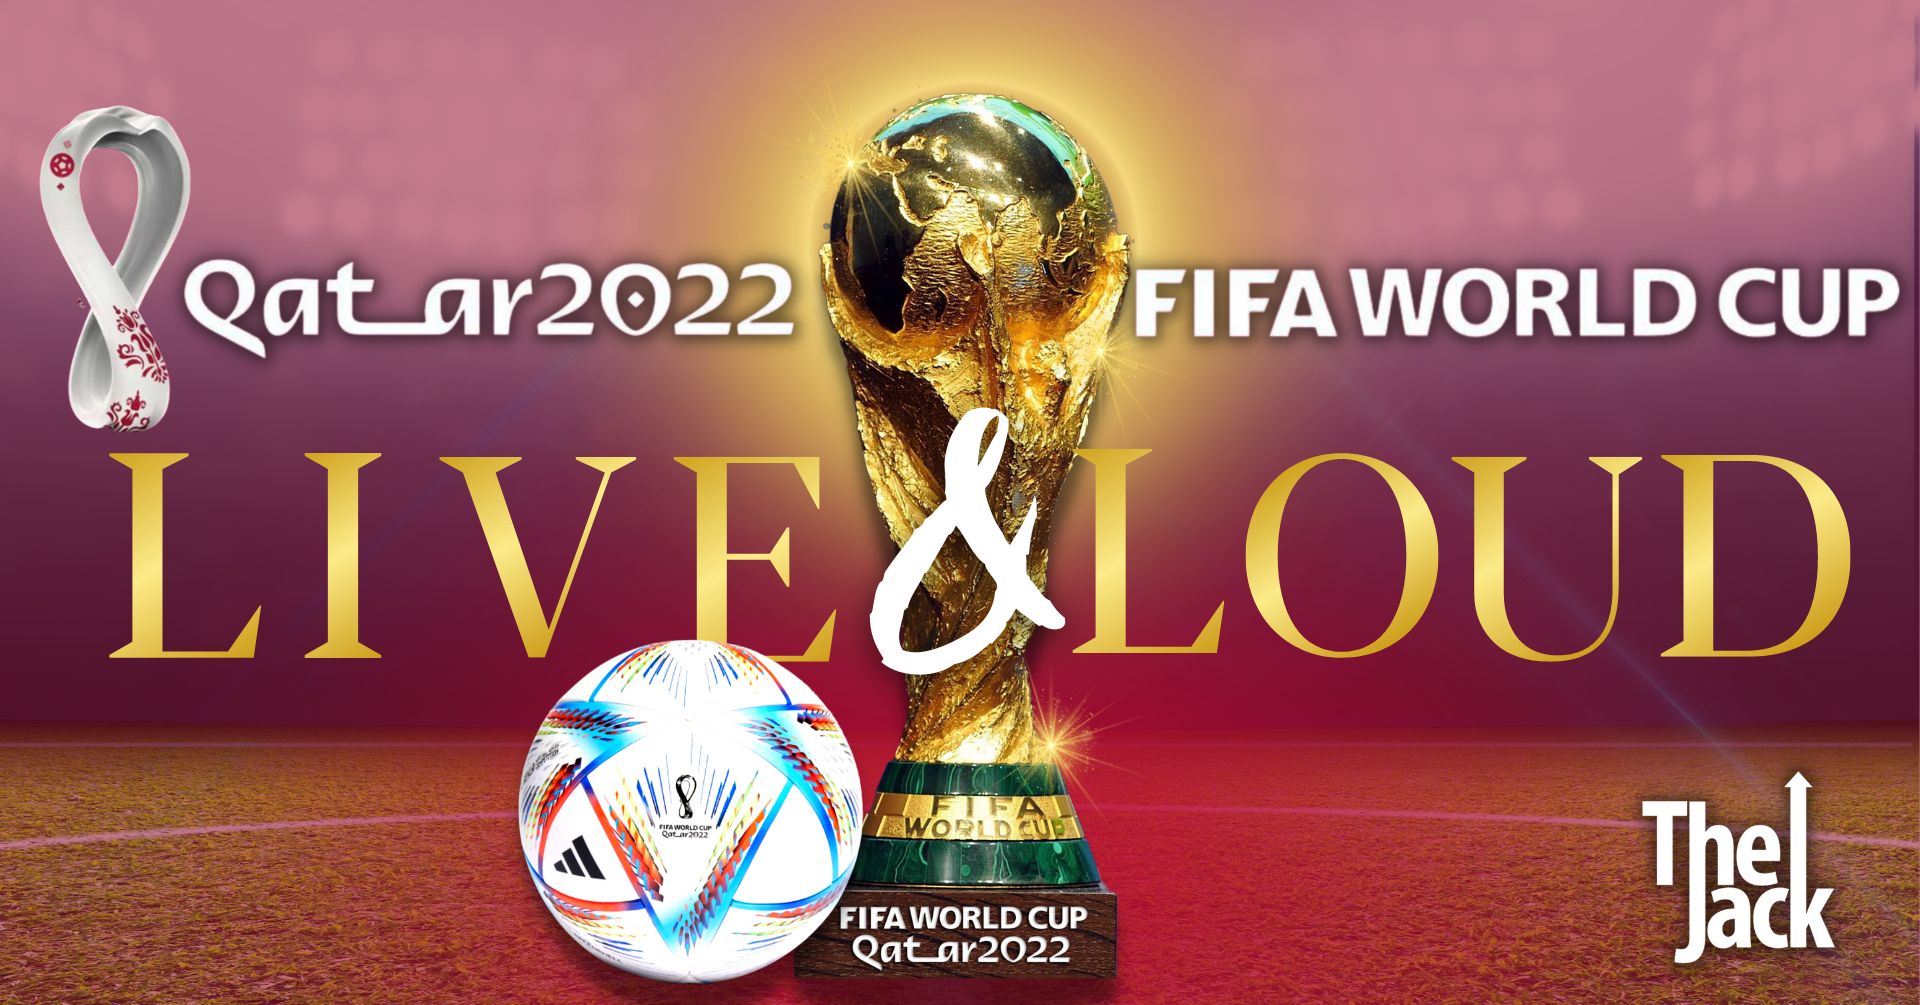 FIFA WORLD CUP 2022 WATCH IT LIVE and LOUD THE JACK, CAIRNS The Jack Cairns